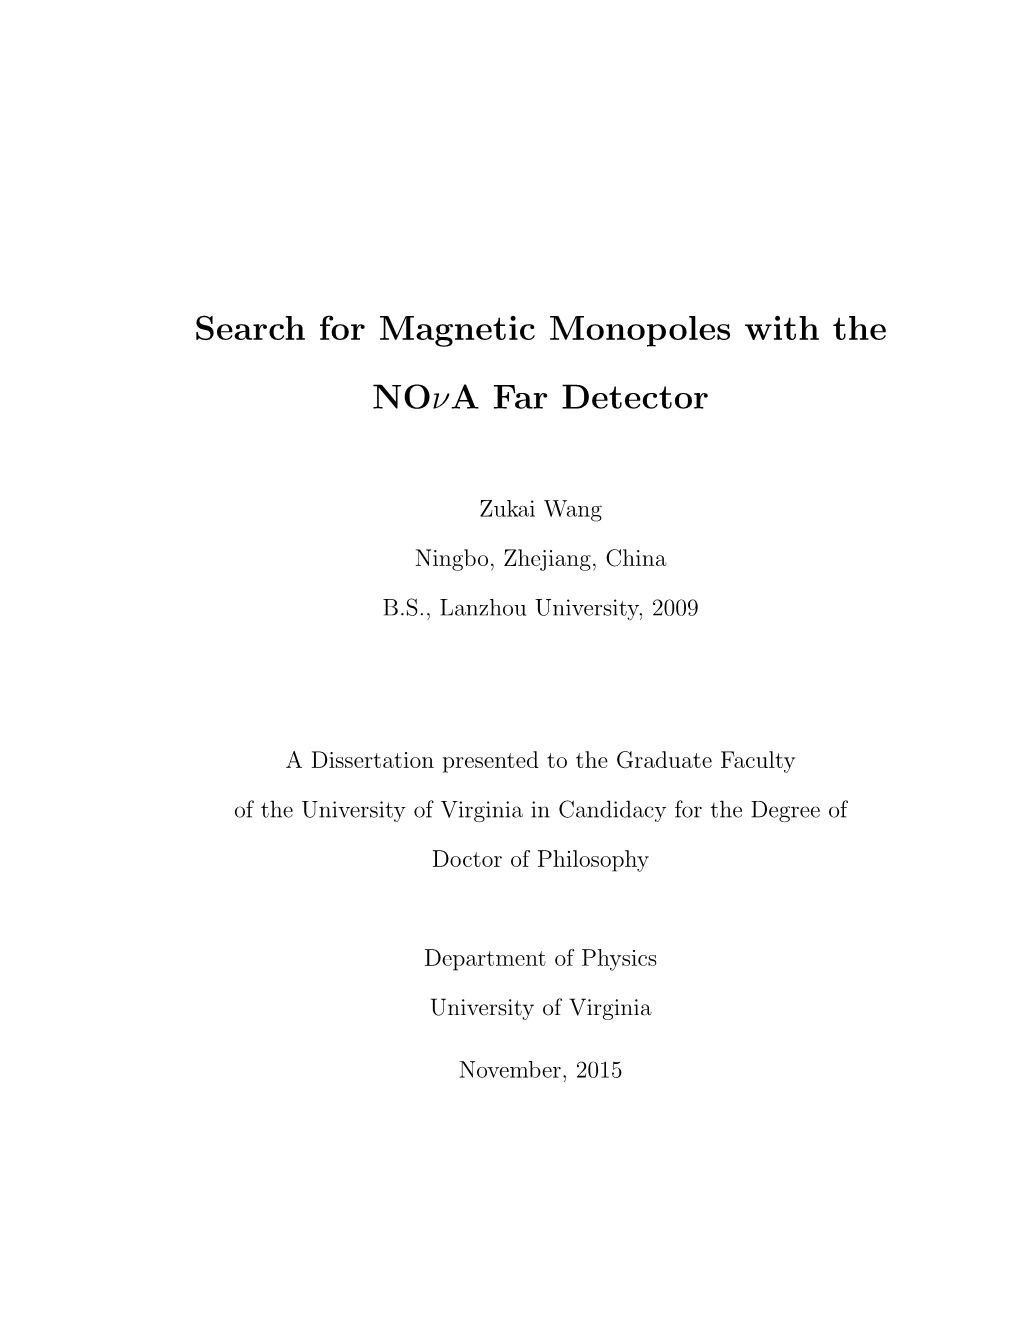 Search for Magnetic Monopoles with the Noνa Far Detector